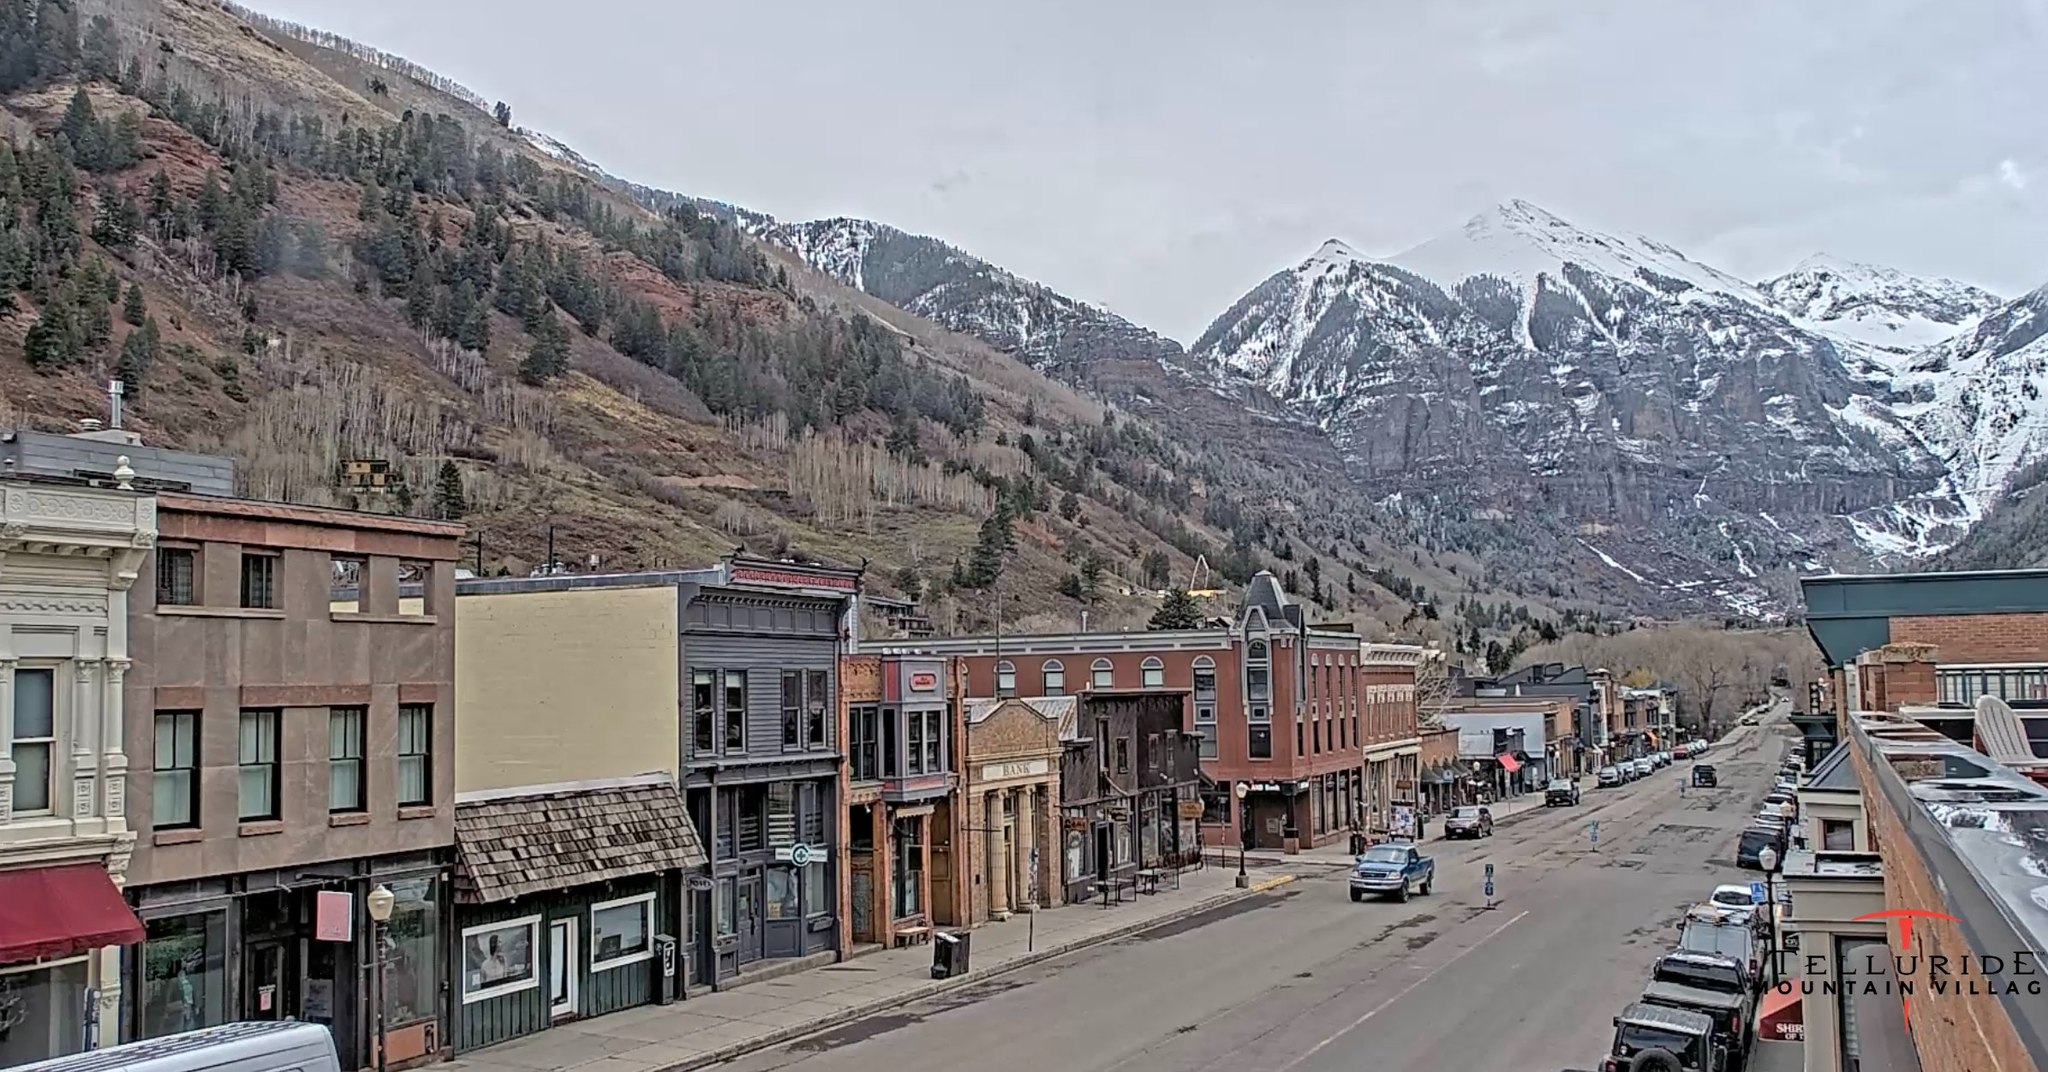 Telluride: “a ski town with a hockey problem”, and a...